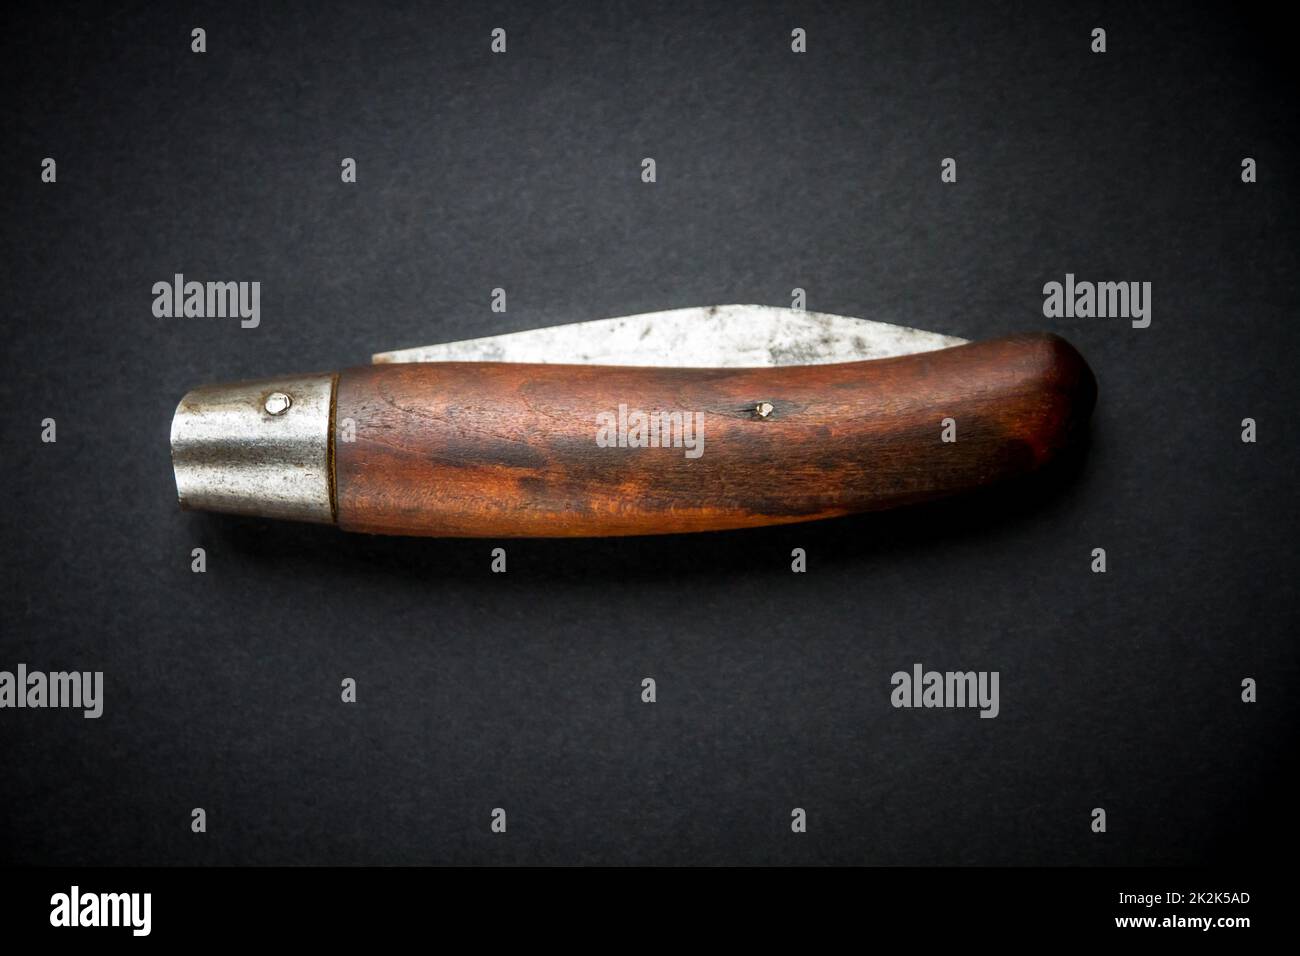 Traditional wooden pocket knife on a black background Stock Photo